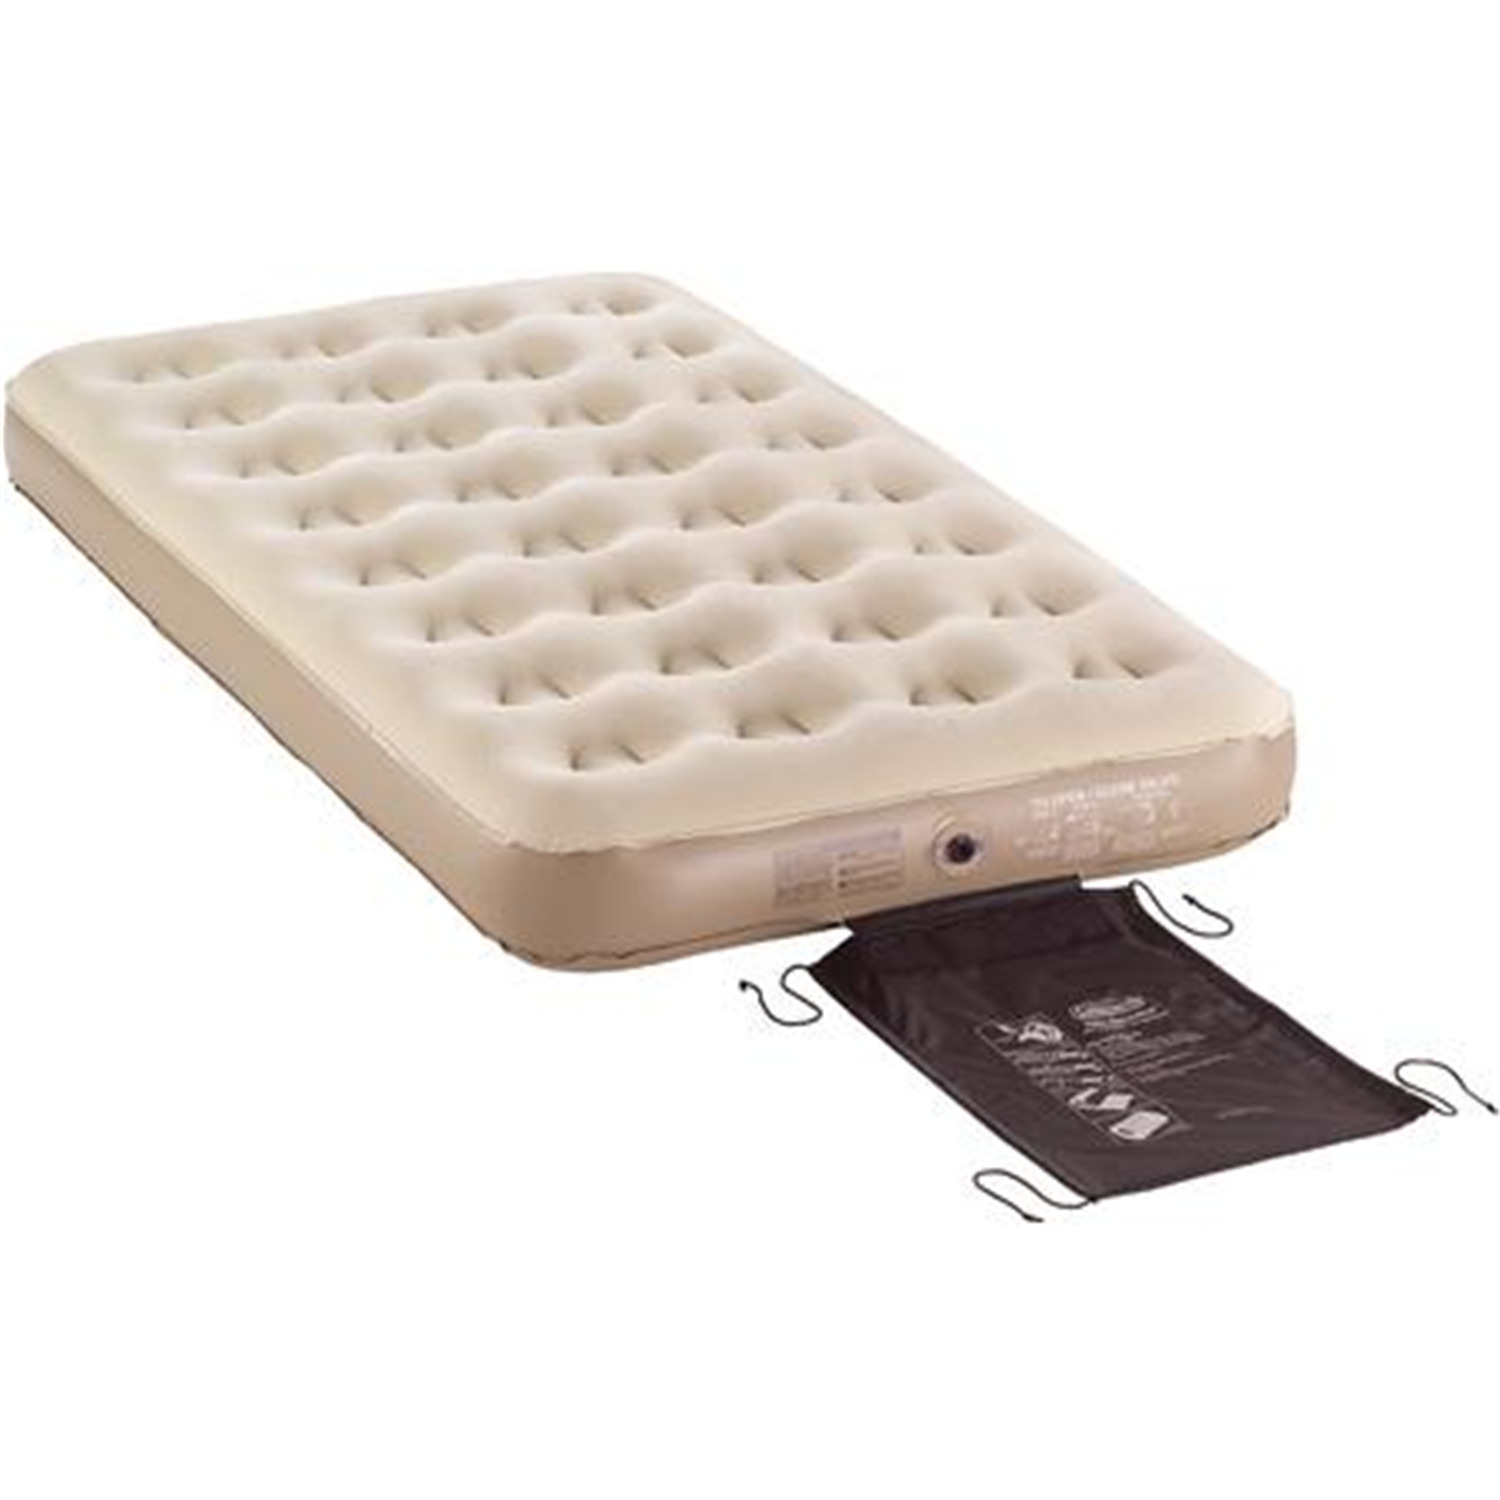 Inflatable Mattress-Size:Queen - image 3 of 3